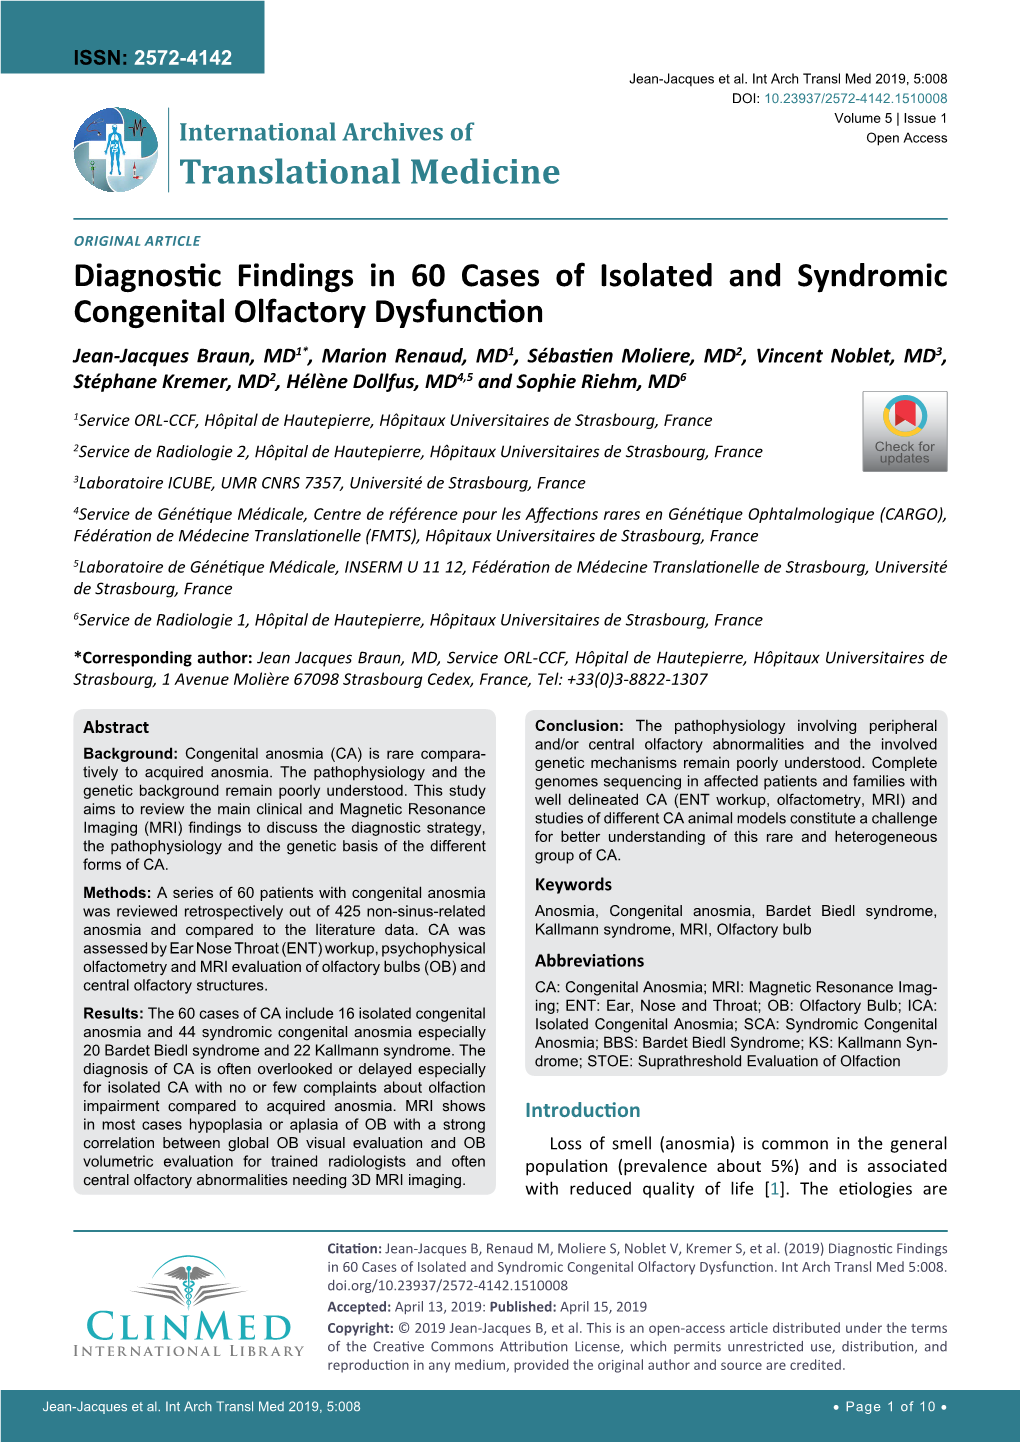 Diagnostic Findings in 60 Cases of Isolated and Syndromic Congenital